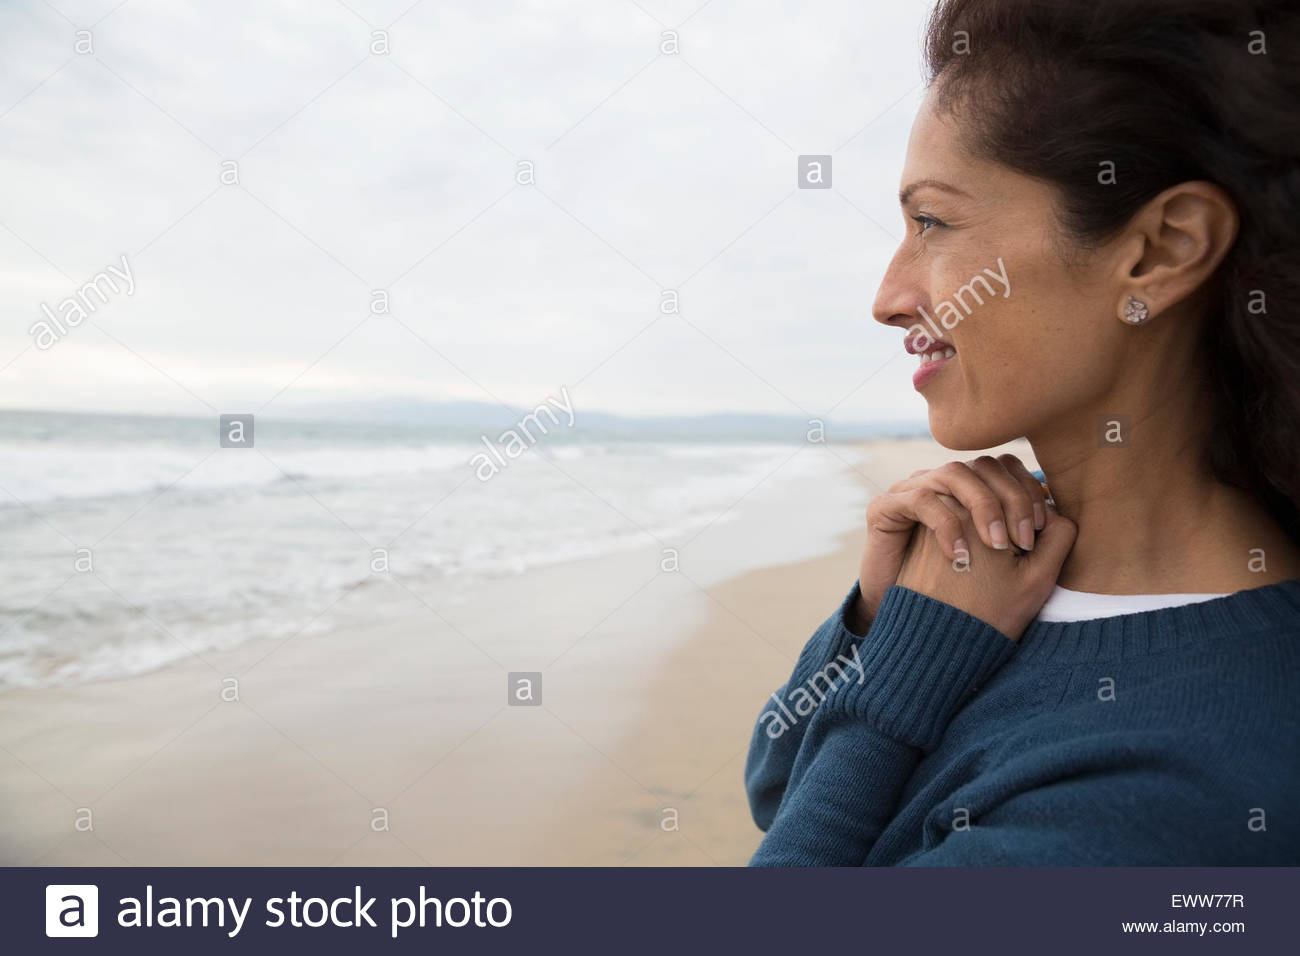 Serene woman looking at ocean view from beach Stock Photo